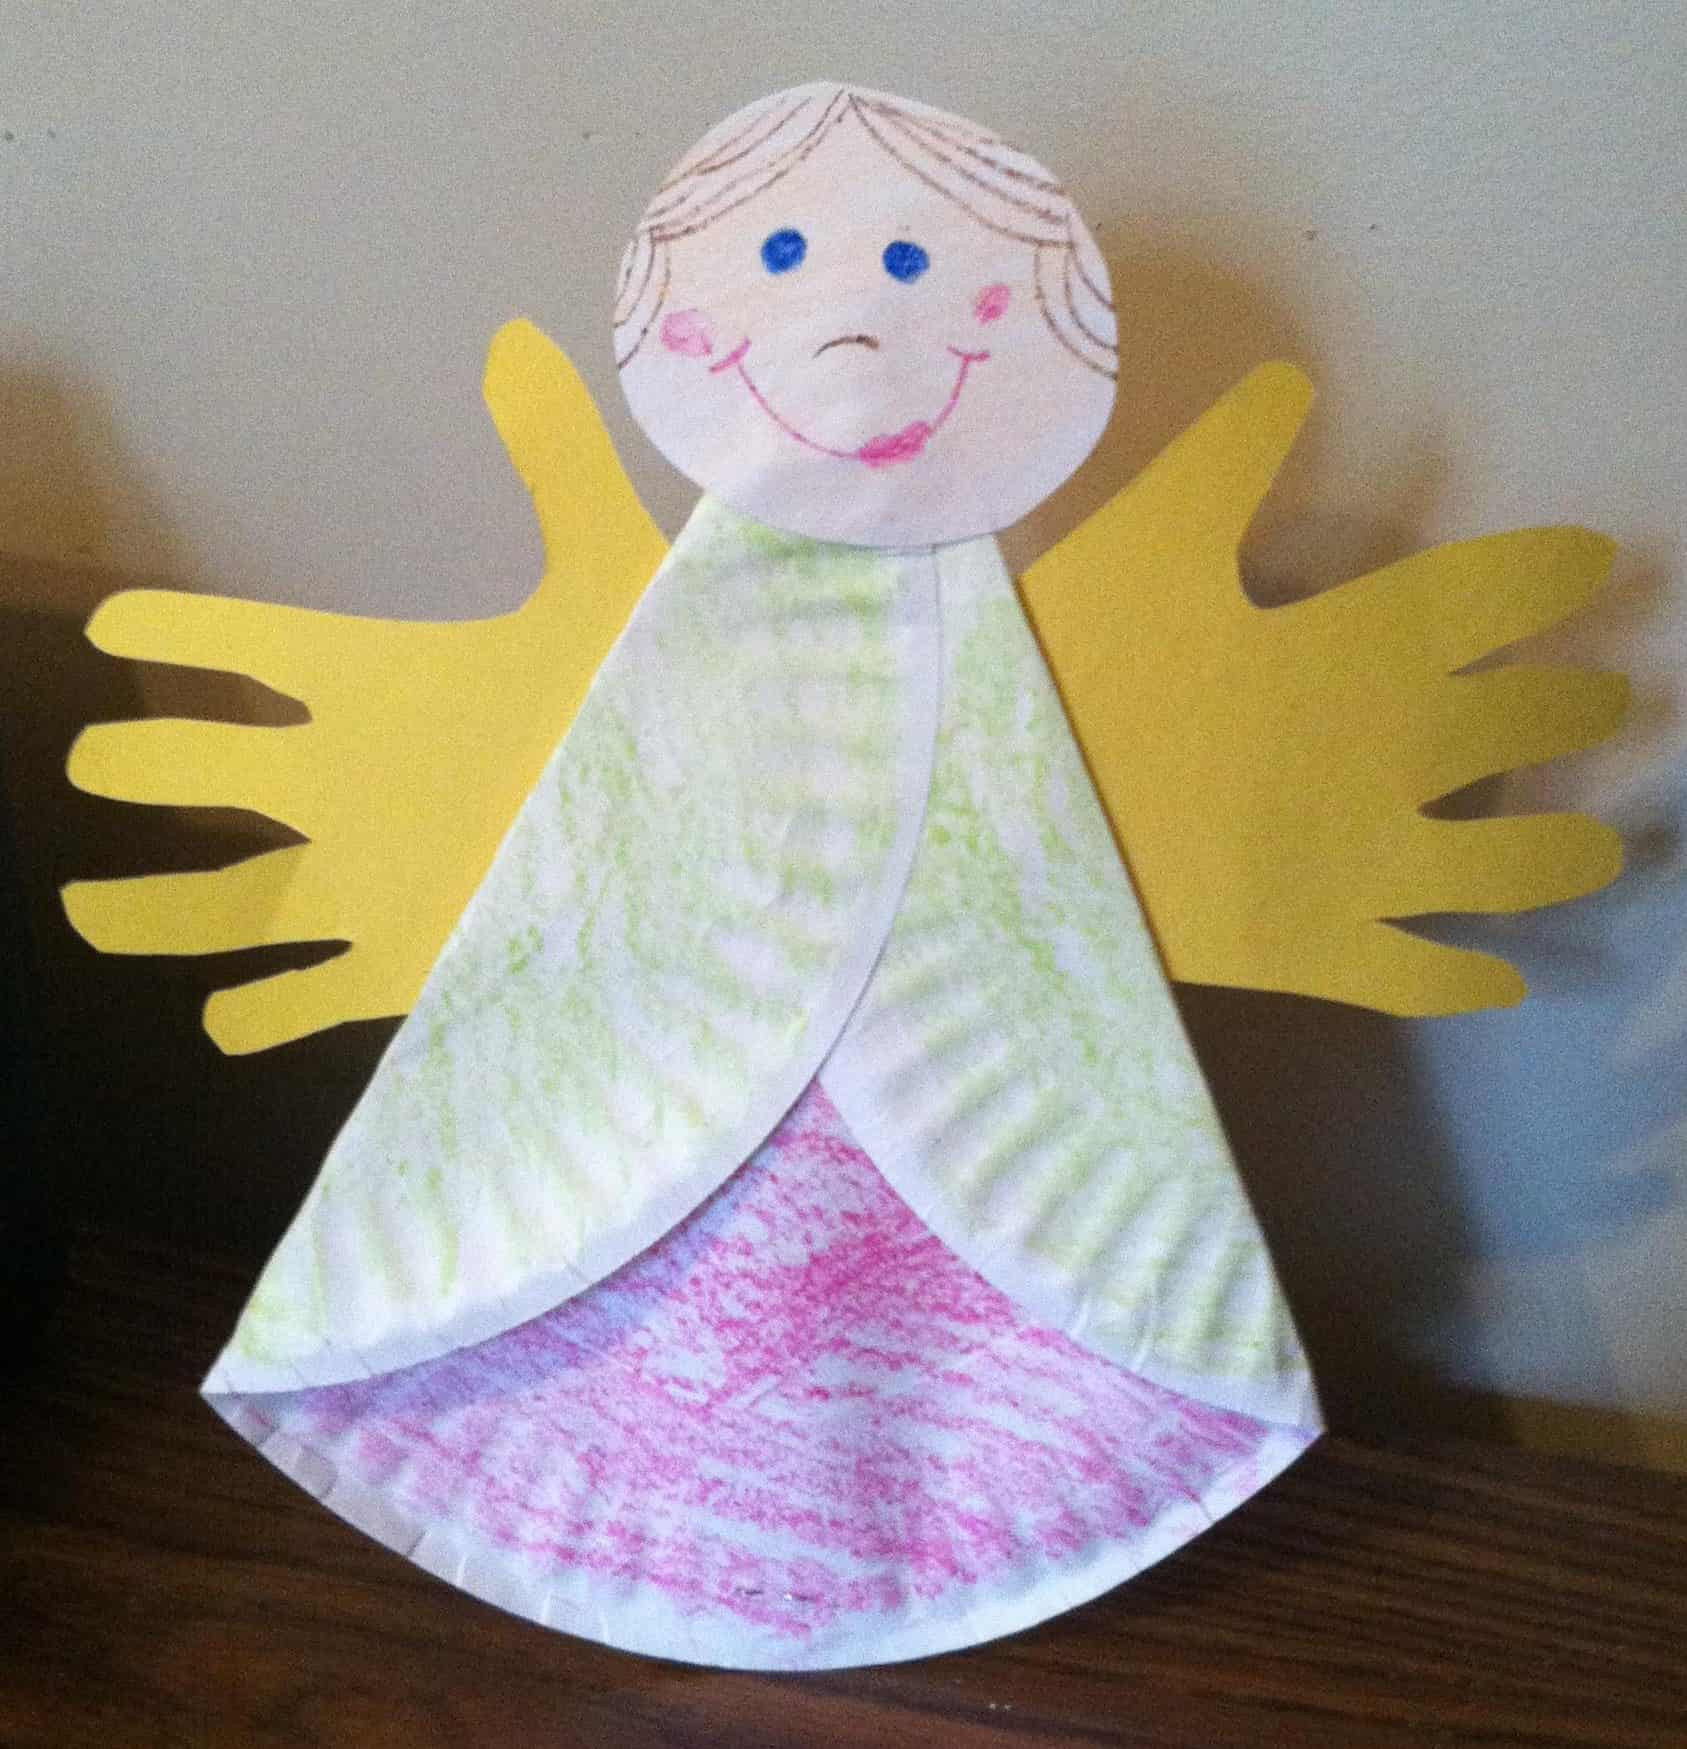 Bible Crafts For Preschoolers Free
 Gabriel Told About Jesus Bible Craft Children s Bible